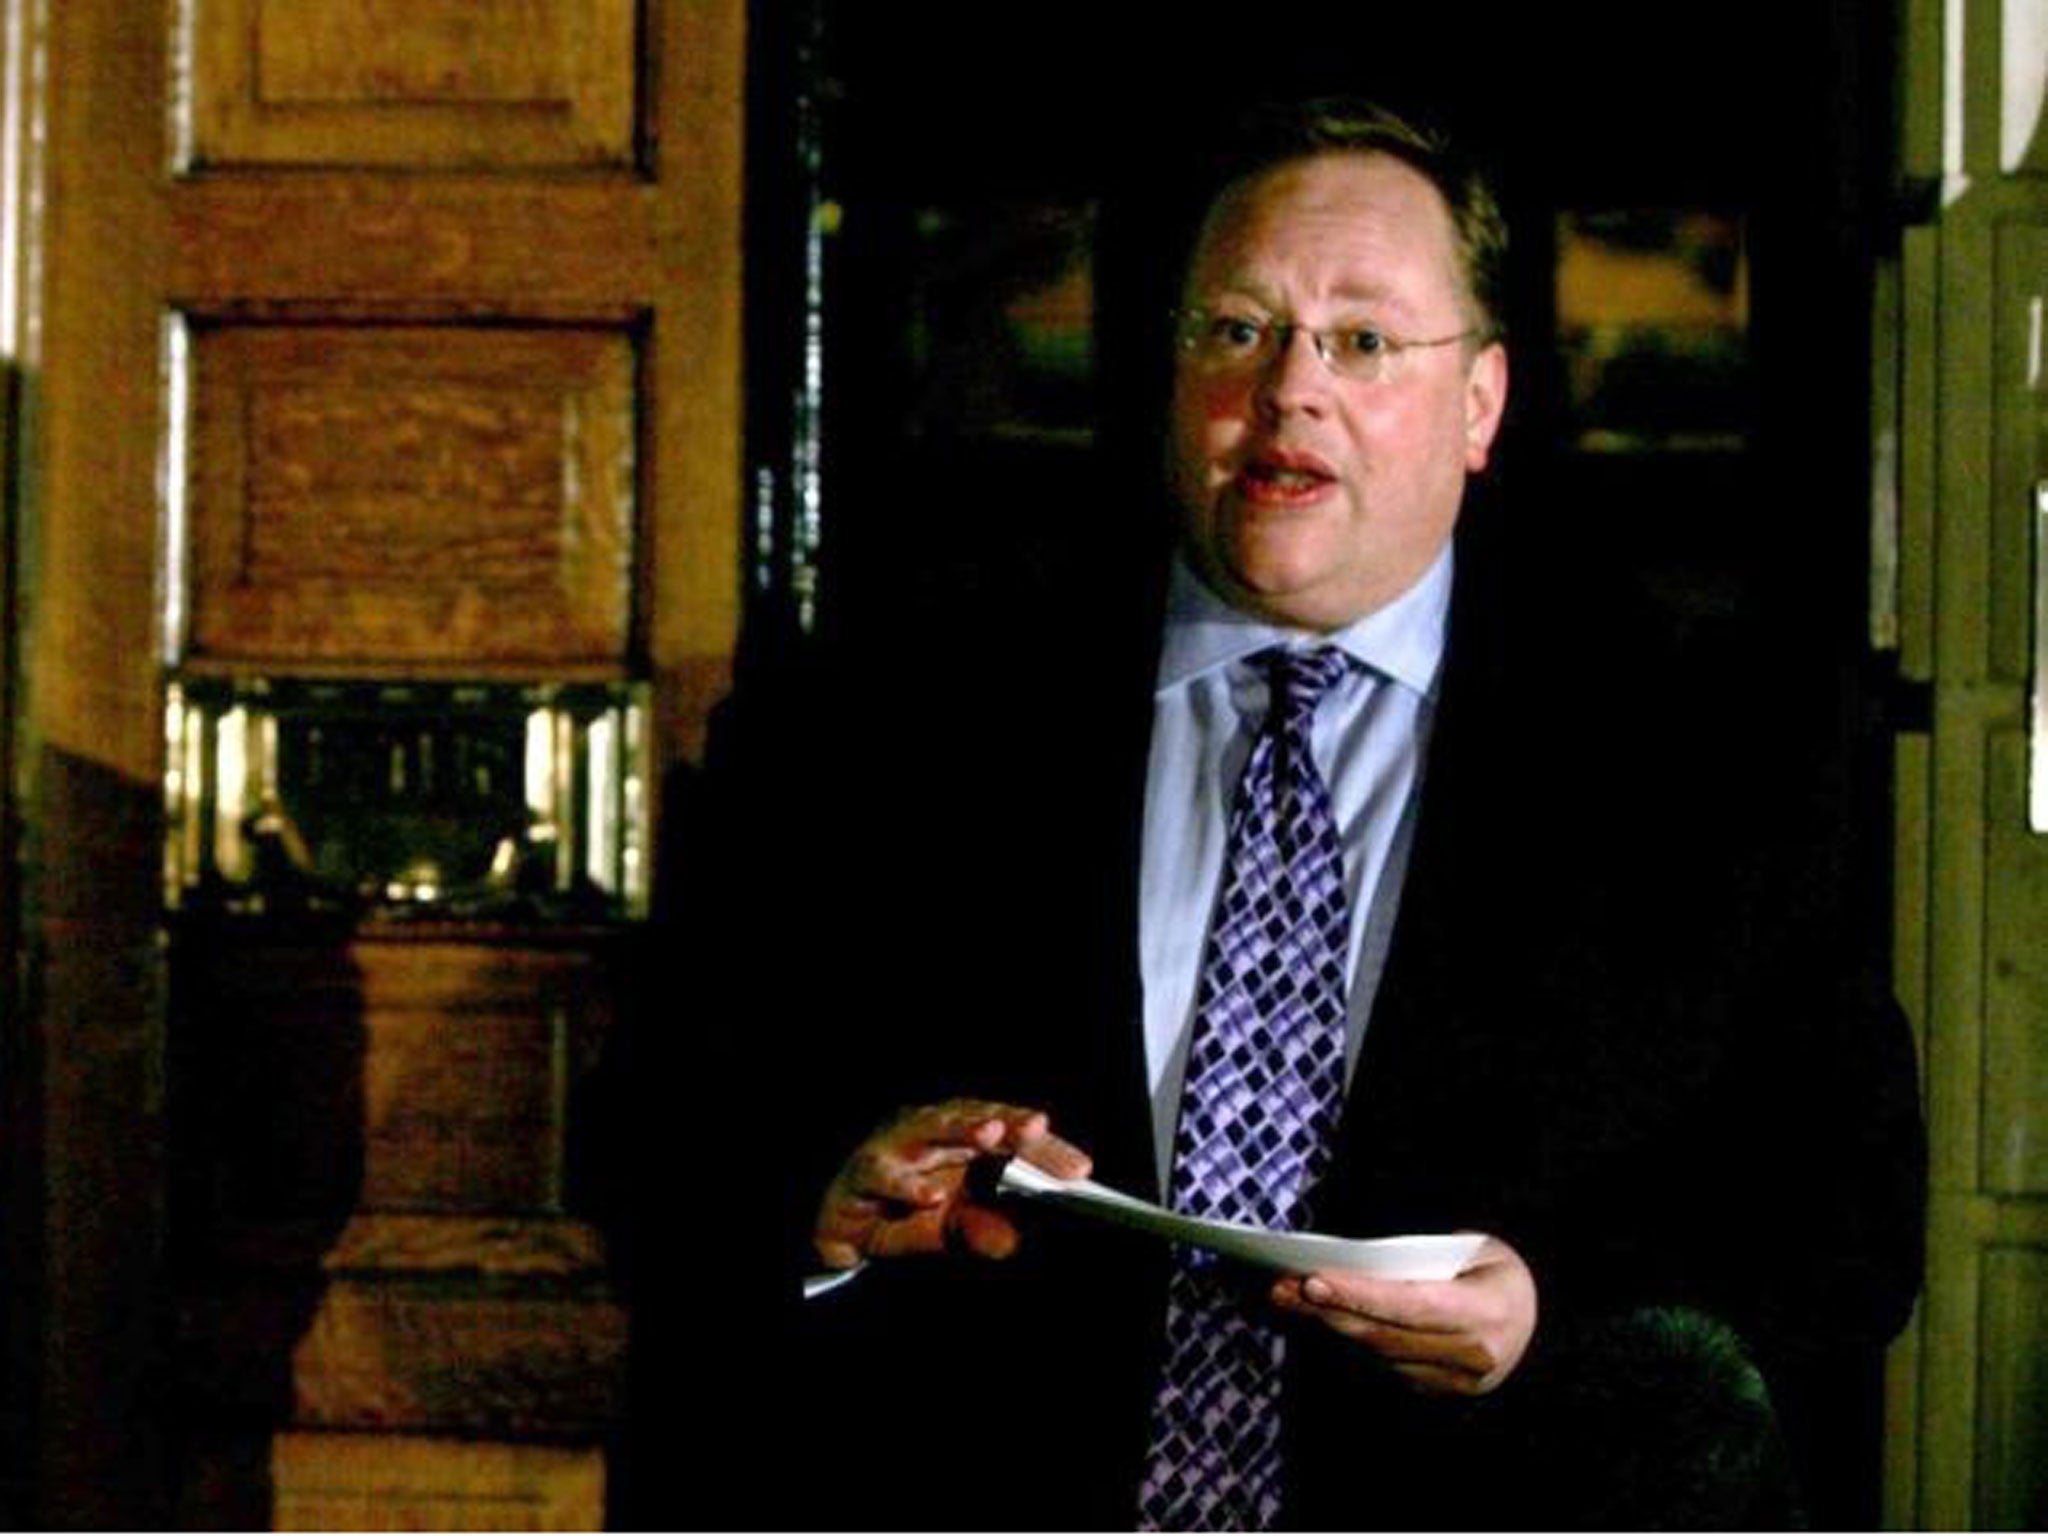 Liberal Democrat peer Lord Rennard will not face any further action over allegations of sexual harassment against female activists